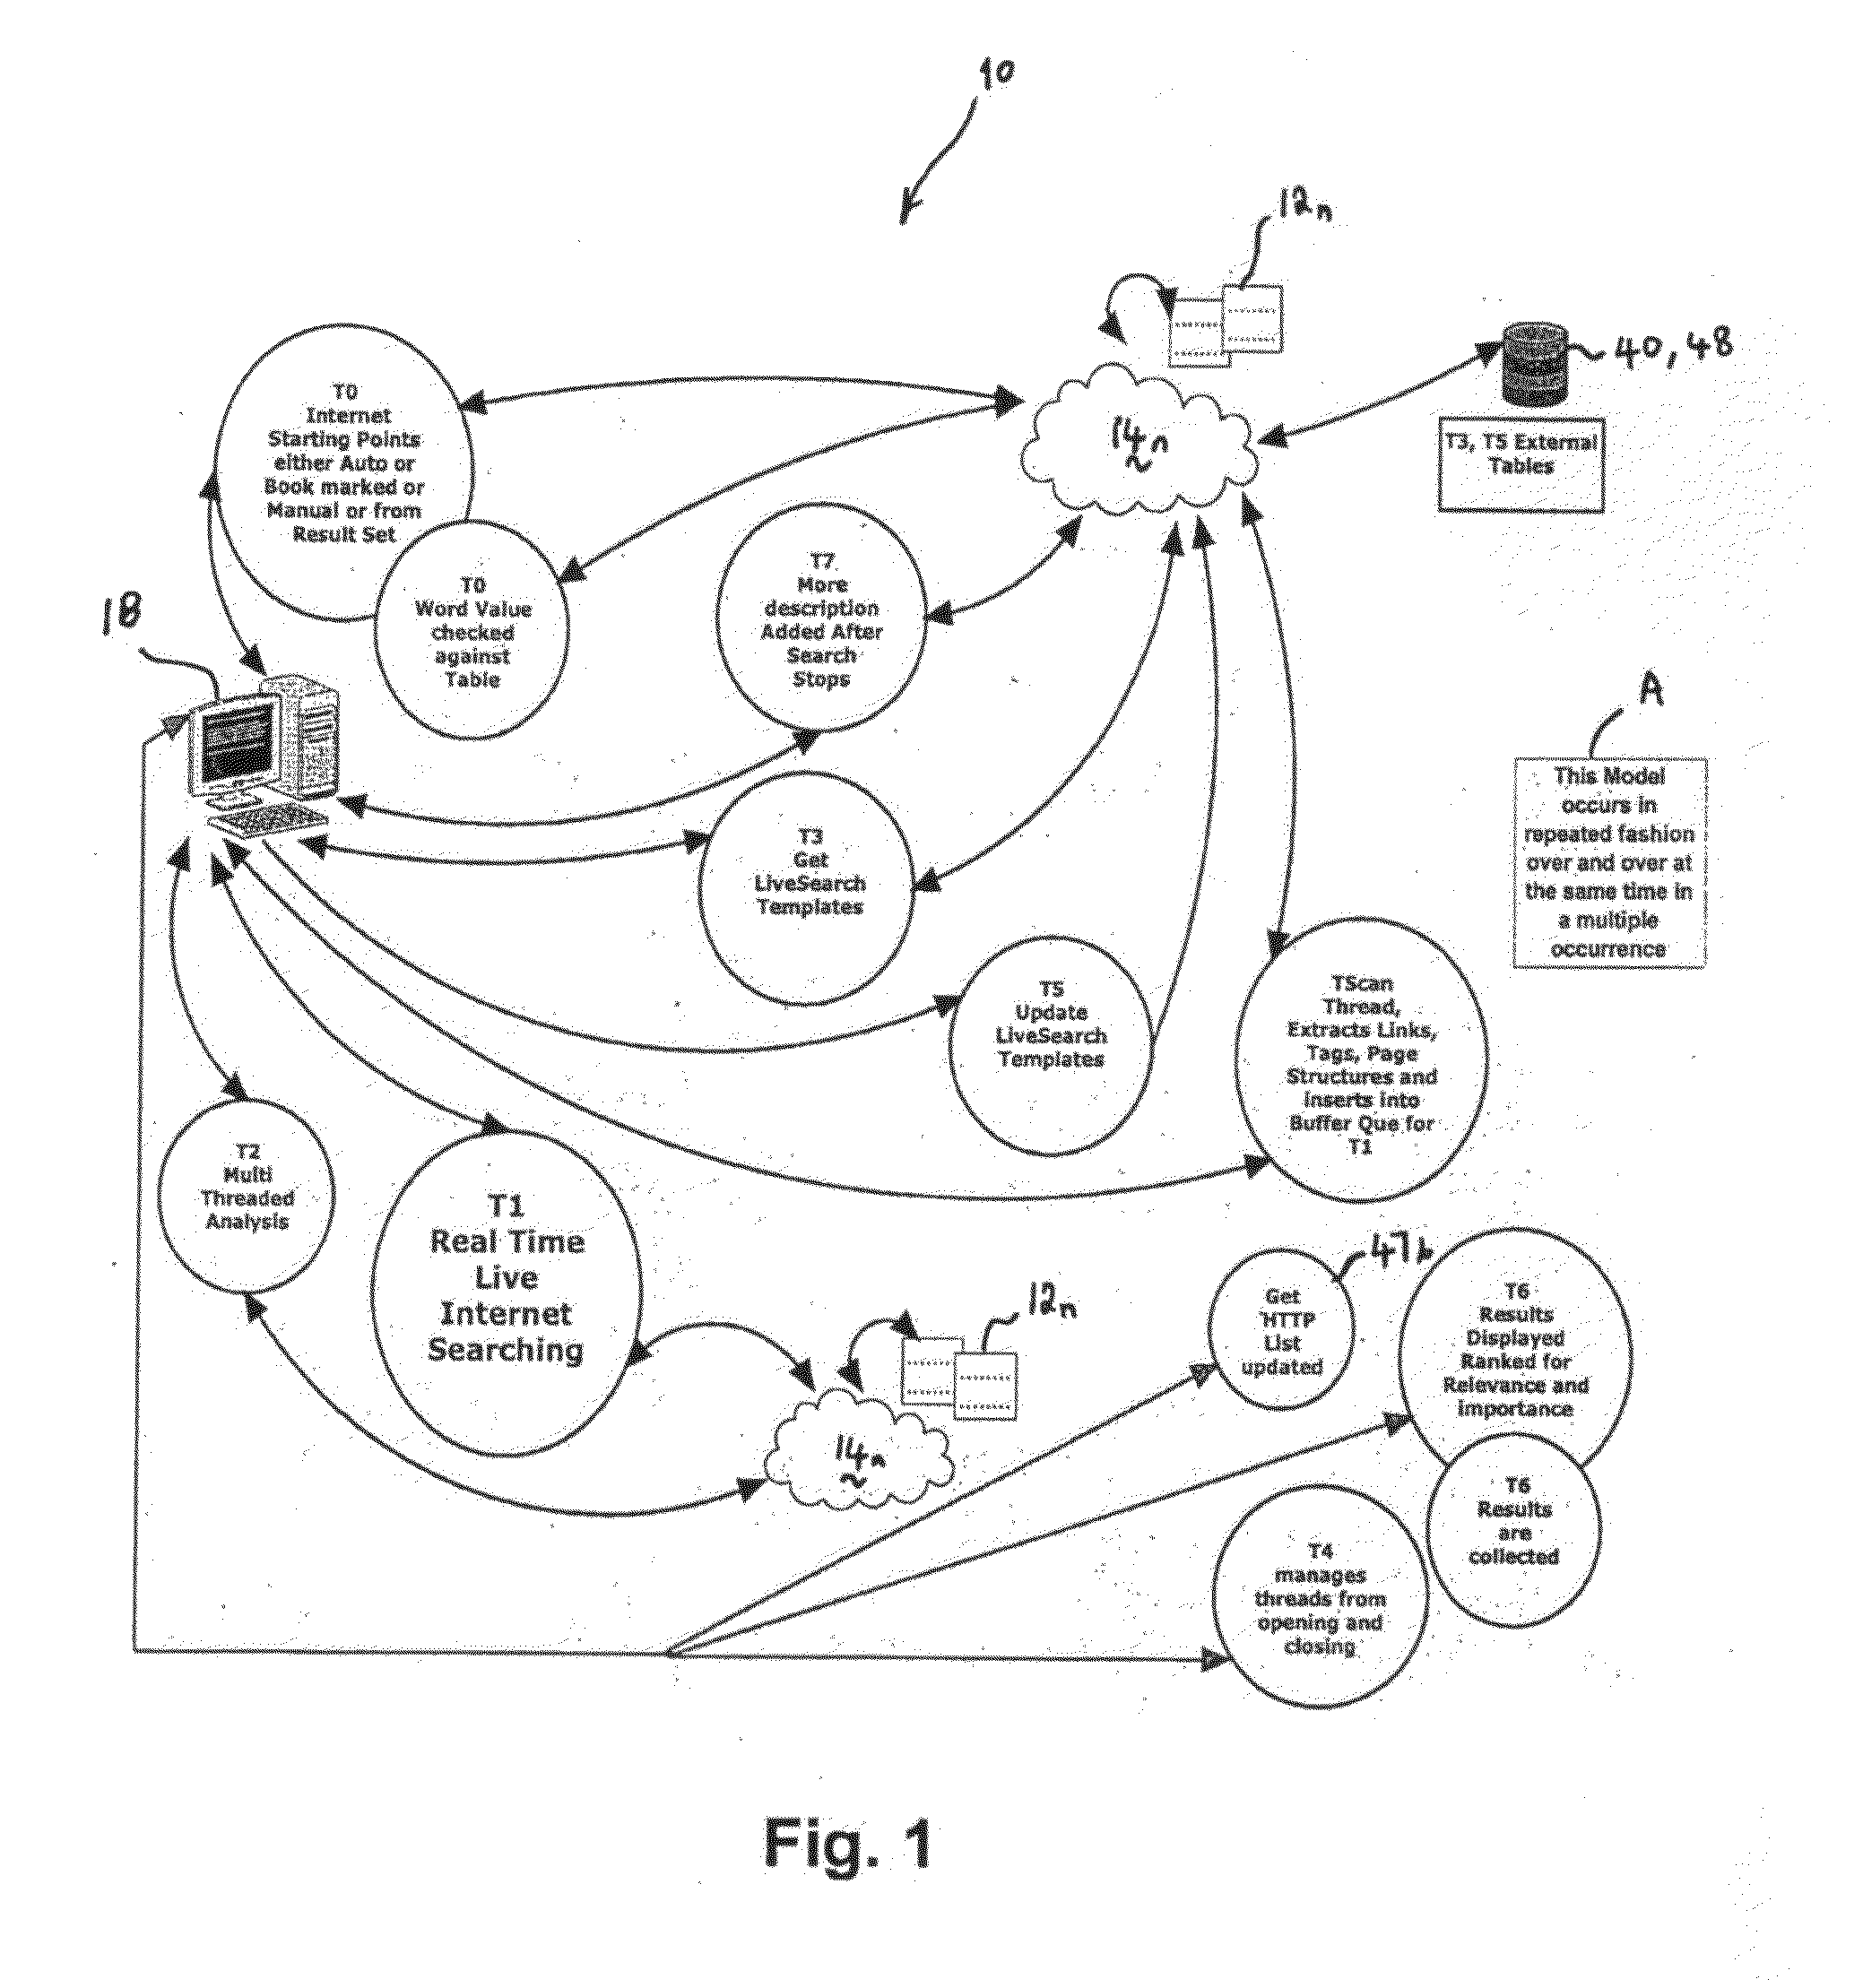 Method and/or System for Searching Network Content